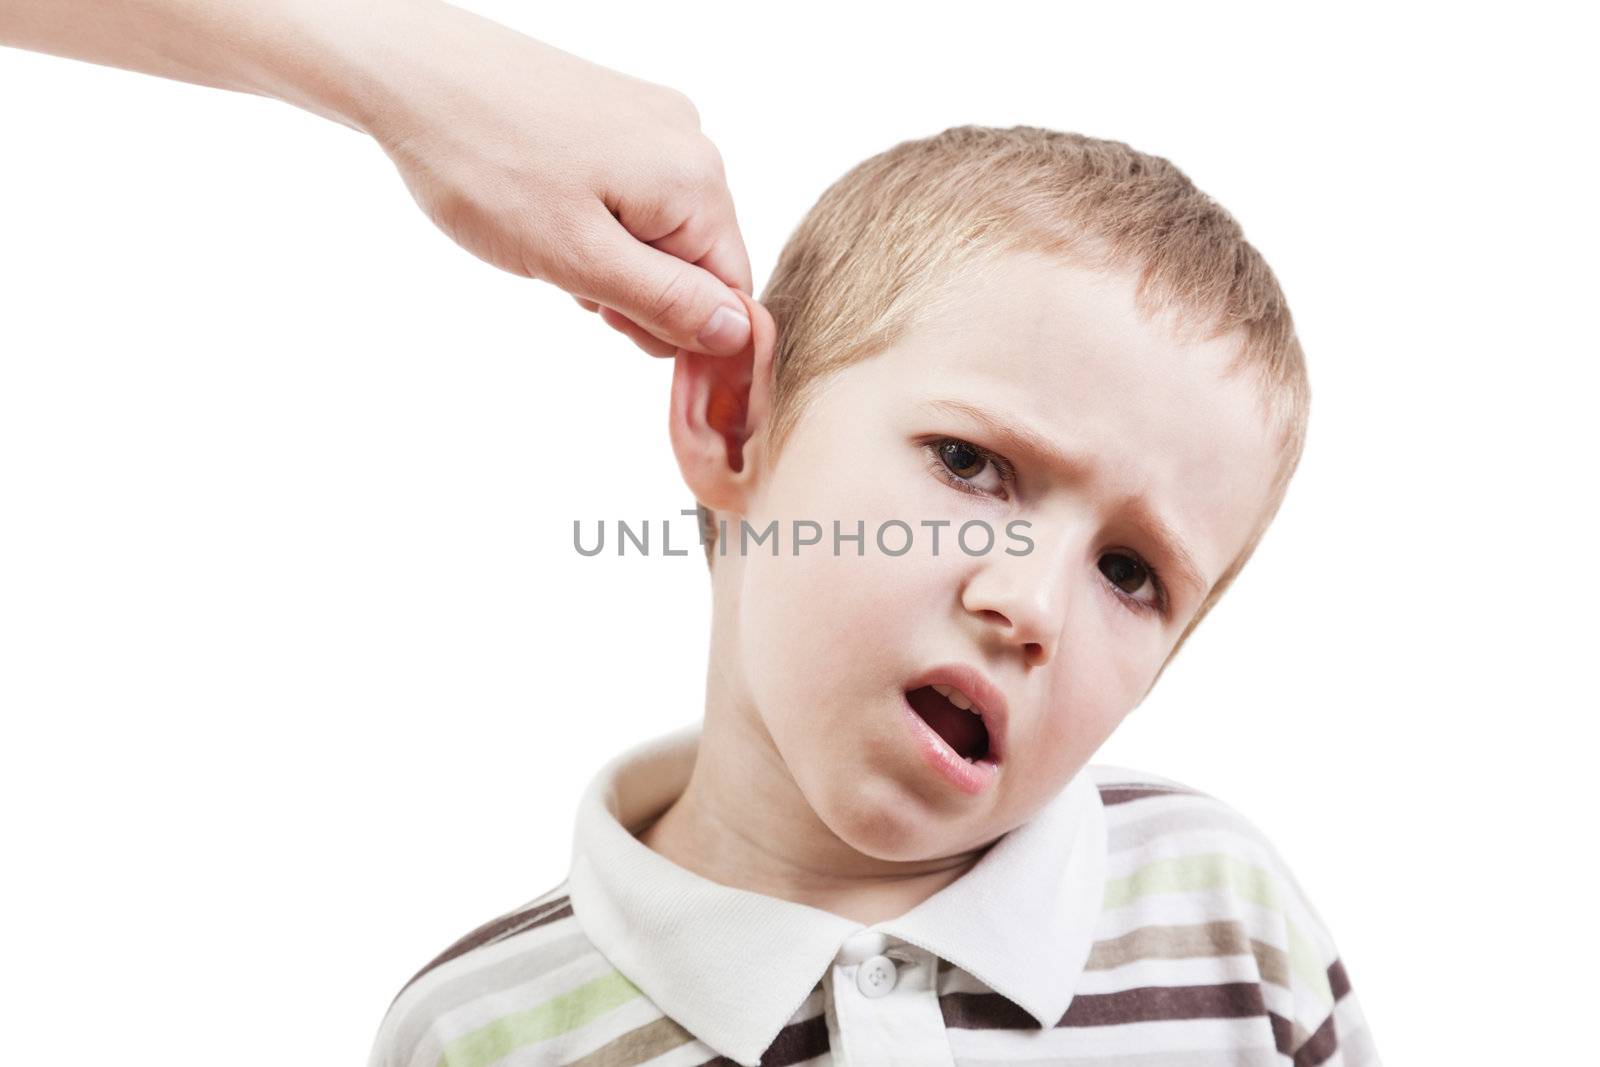 Violence and abuse - cry child pull ear punishment